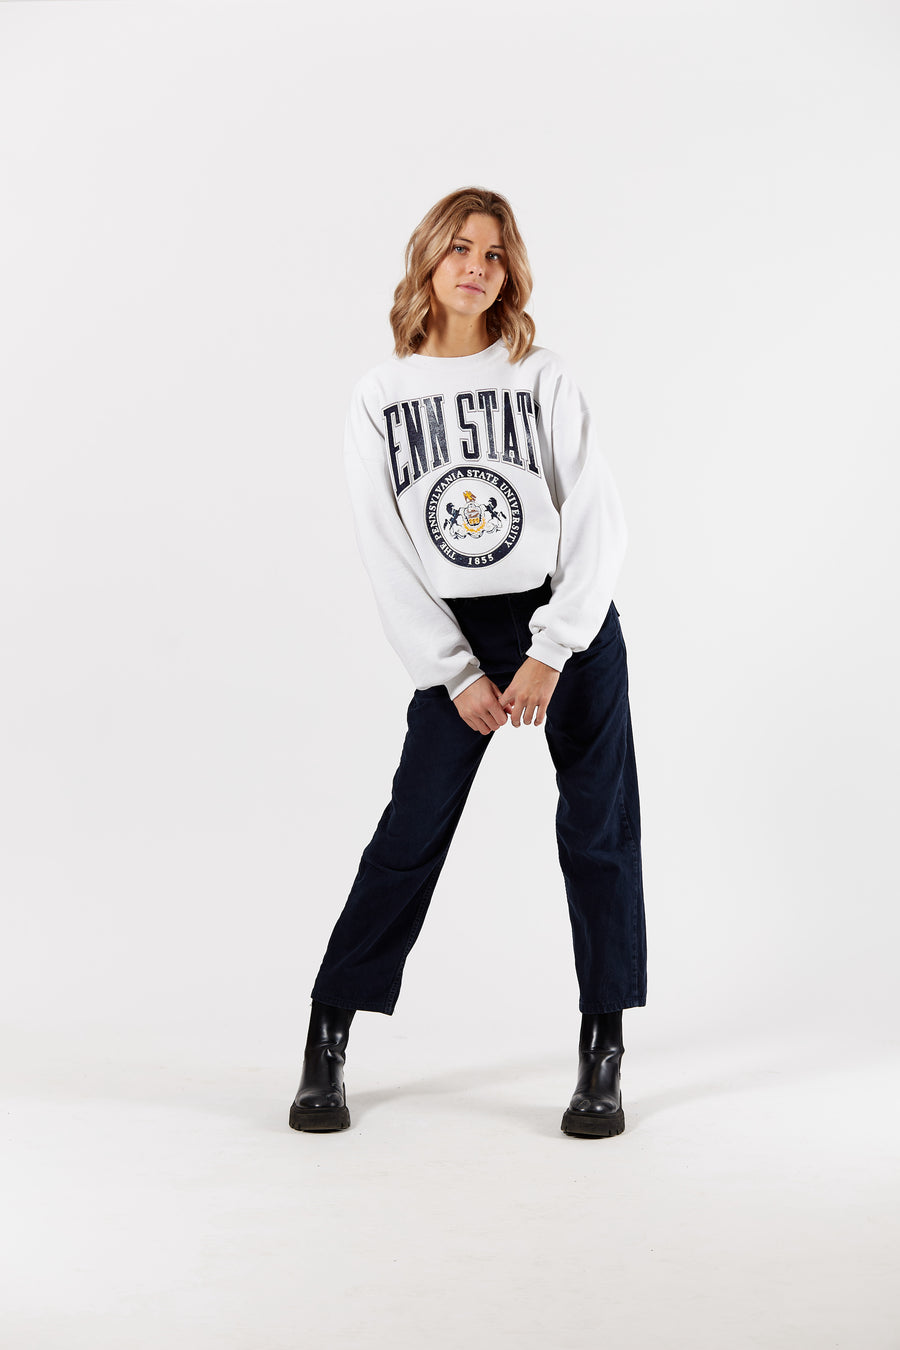 Penn State University Crewneck in a vintage style from thrift store Twise Studio